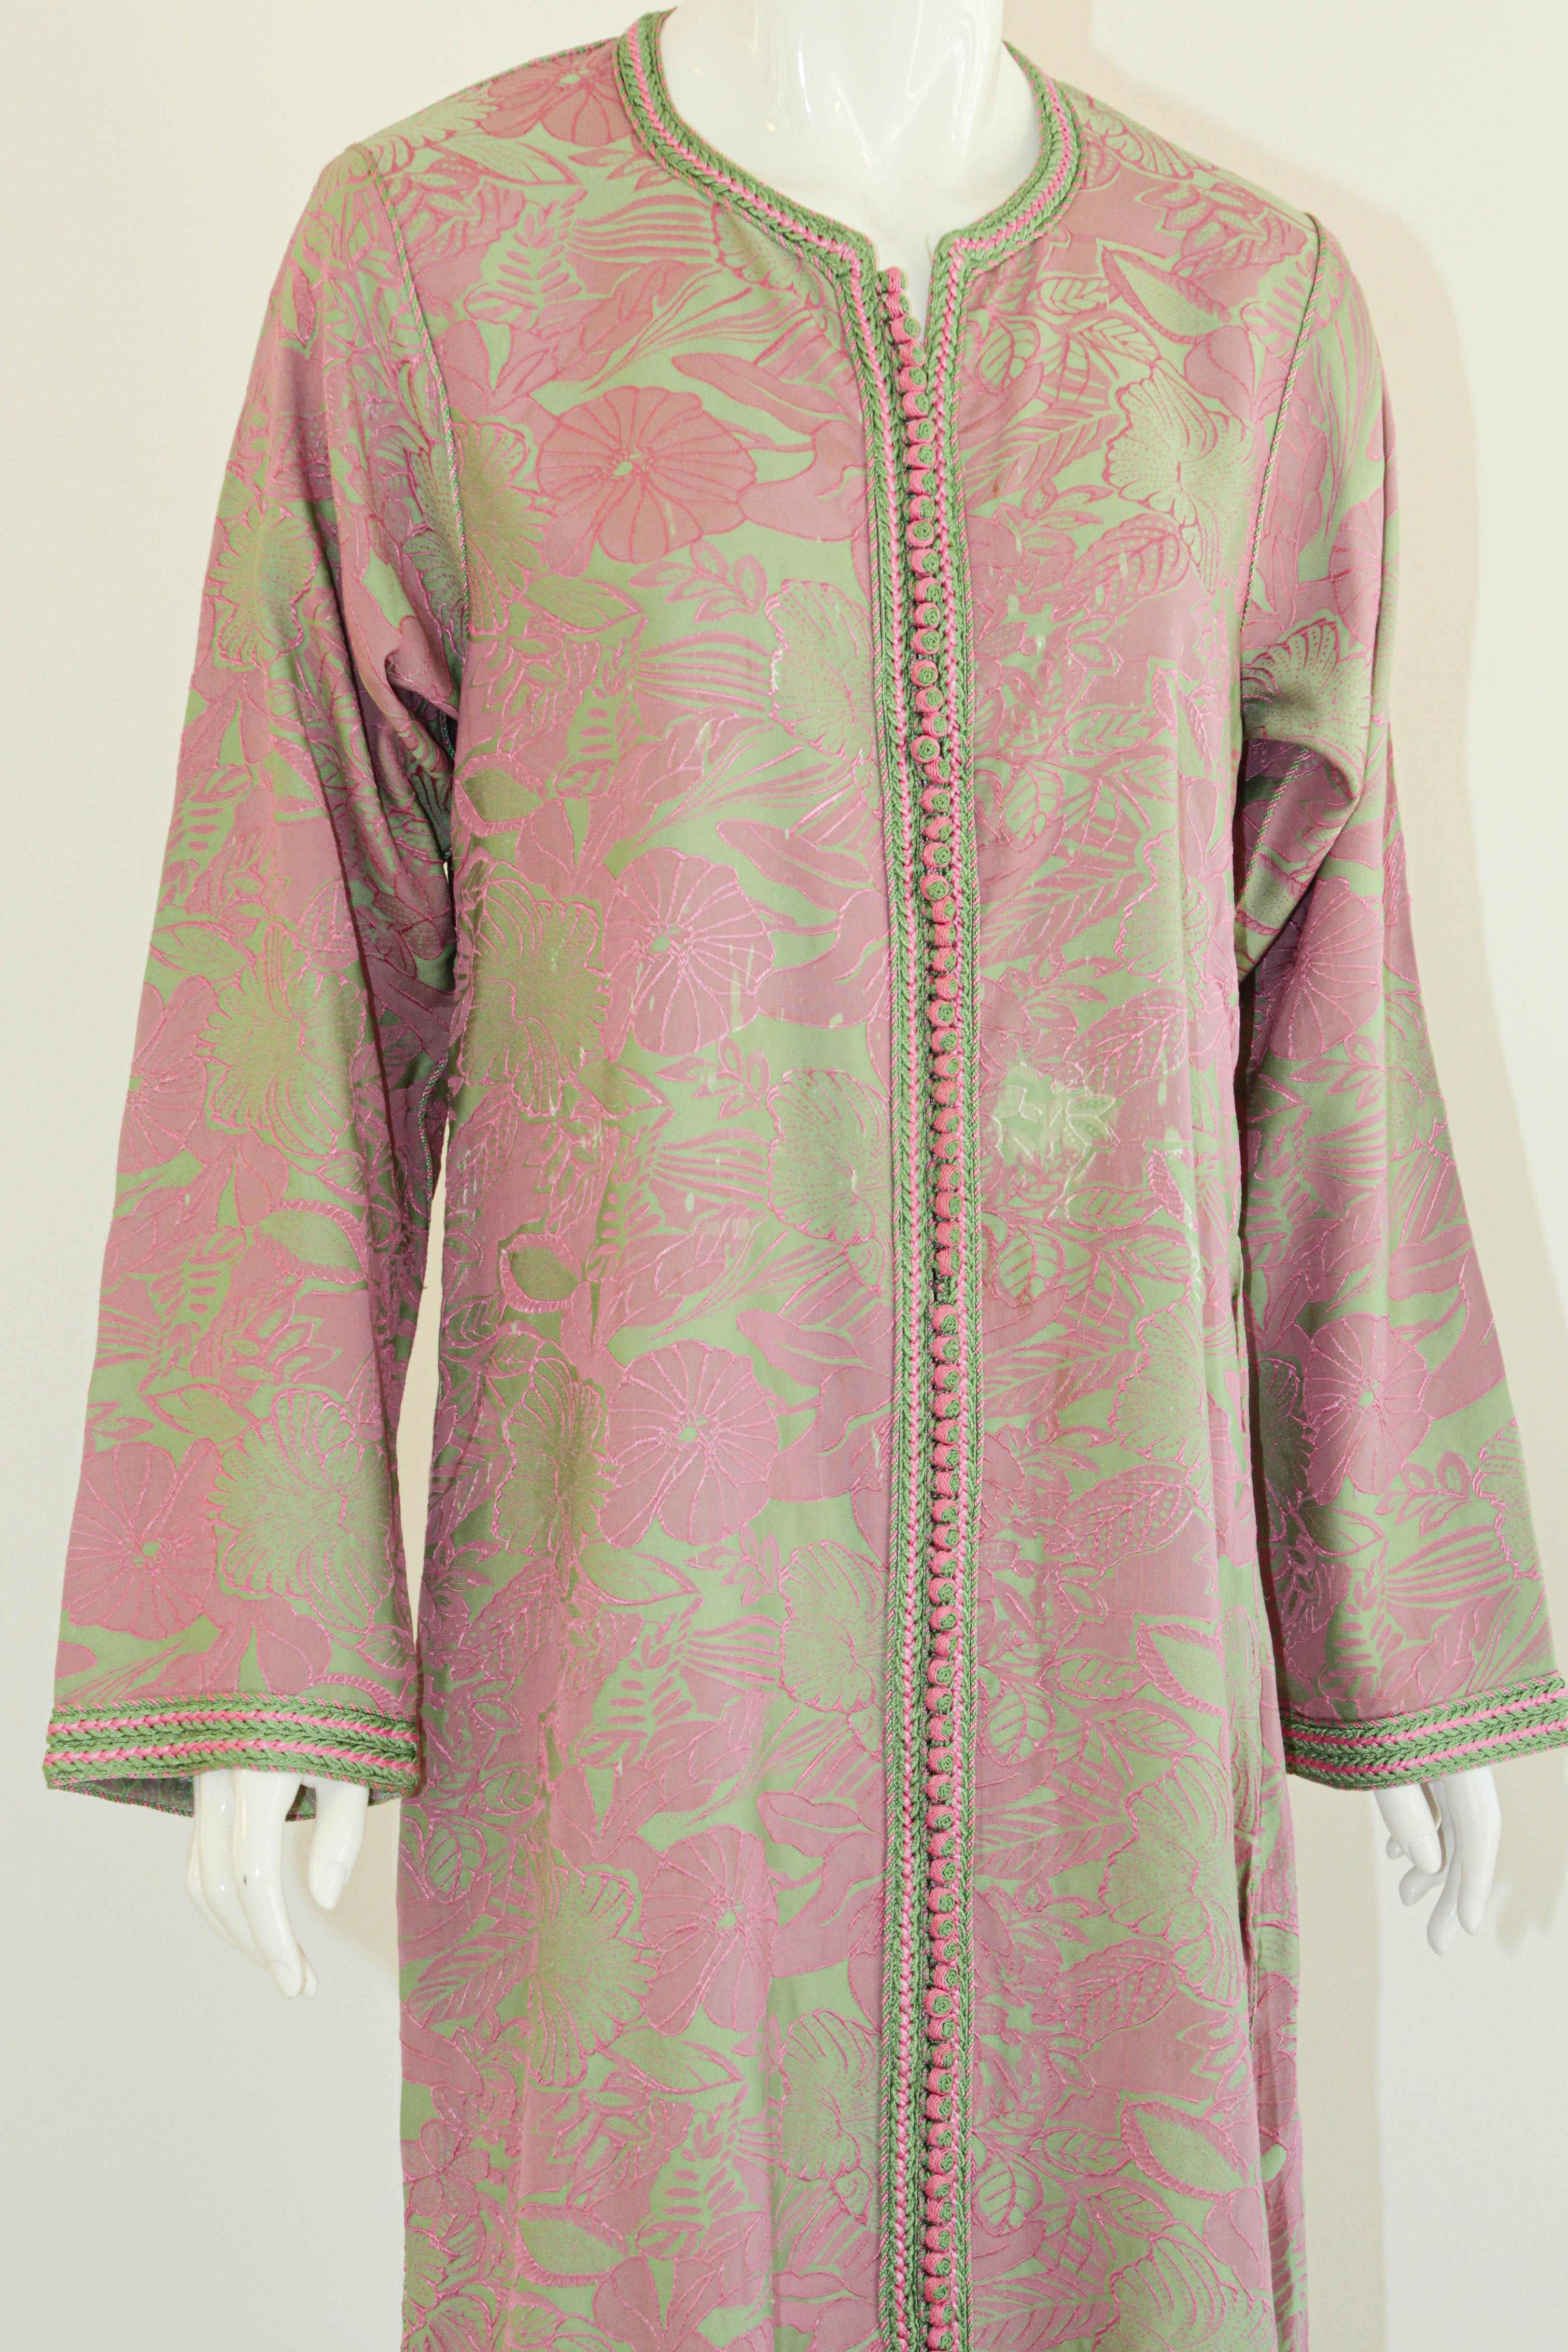 Moroccan Vintage Caftan Pink and Green Trim For Sale 3